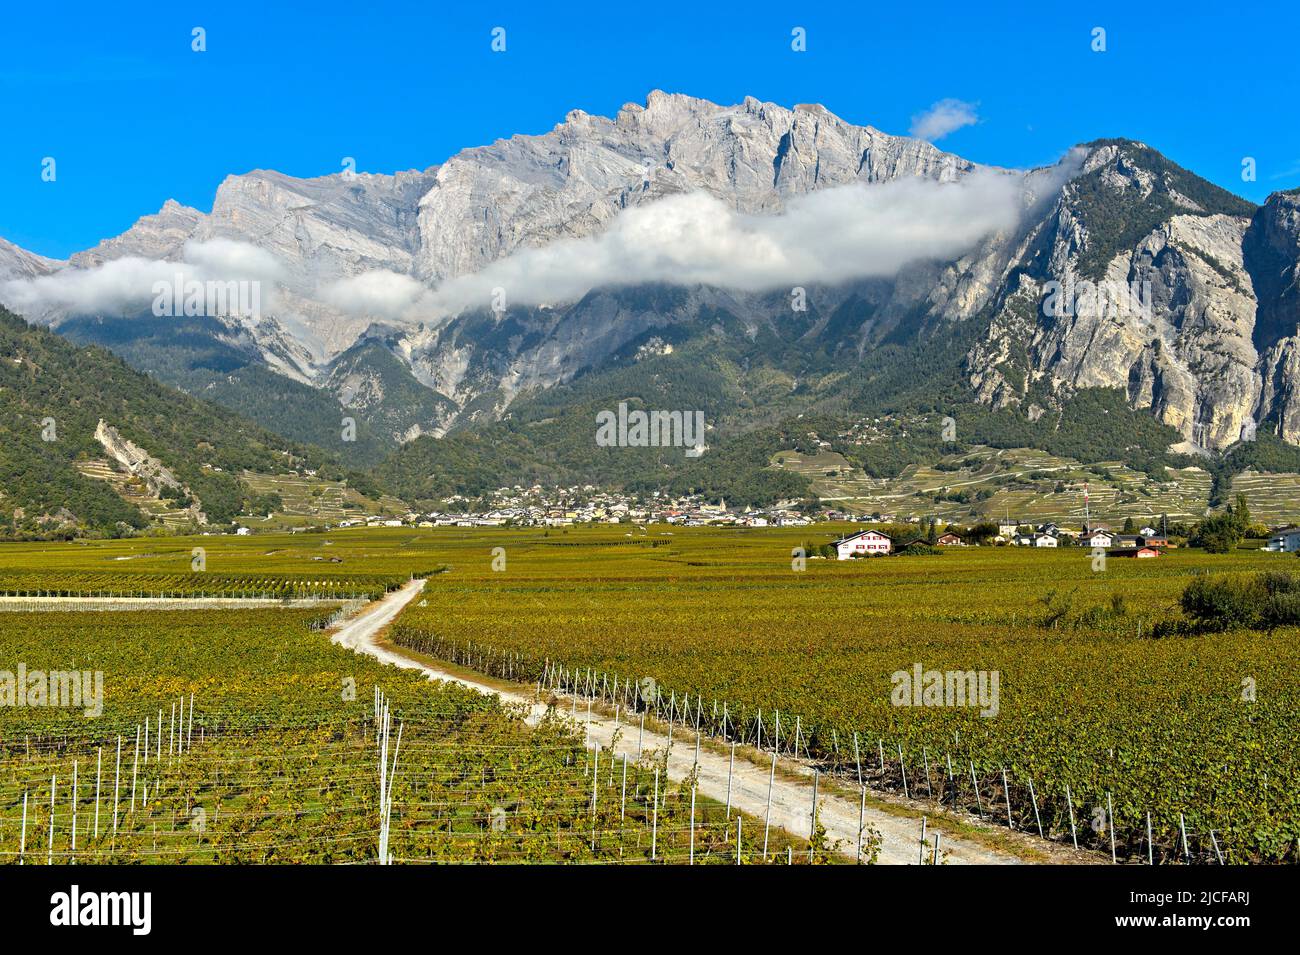 Vineyards in Chamoson wine growing area in front of the rock walls of the Haut de Cry peak, Chamoson, Valais, Switzerland Stock Photo